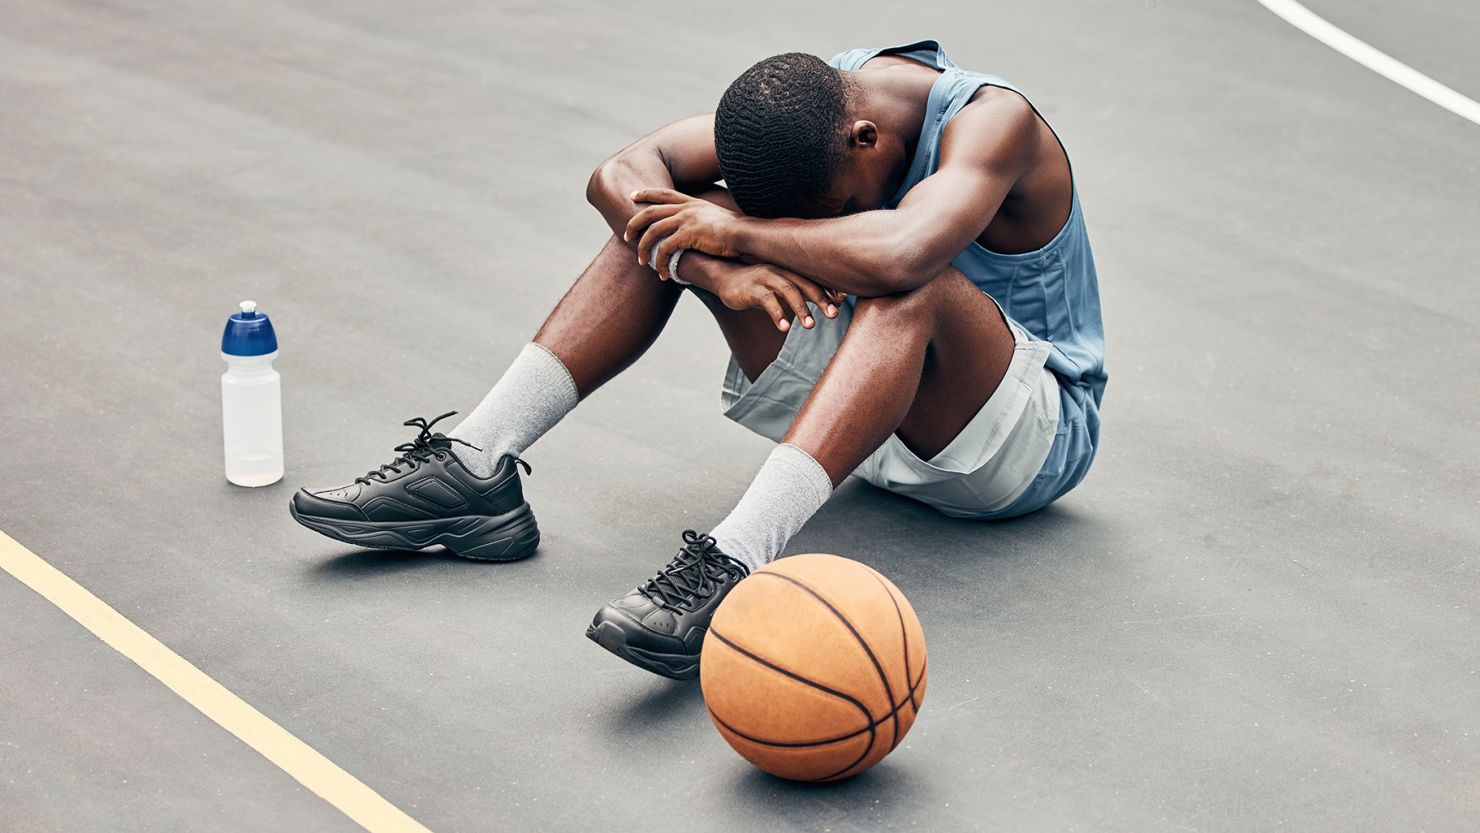 The unique stressors faced by college athletes could partially explain the rise in suicides among this group, experts say.